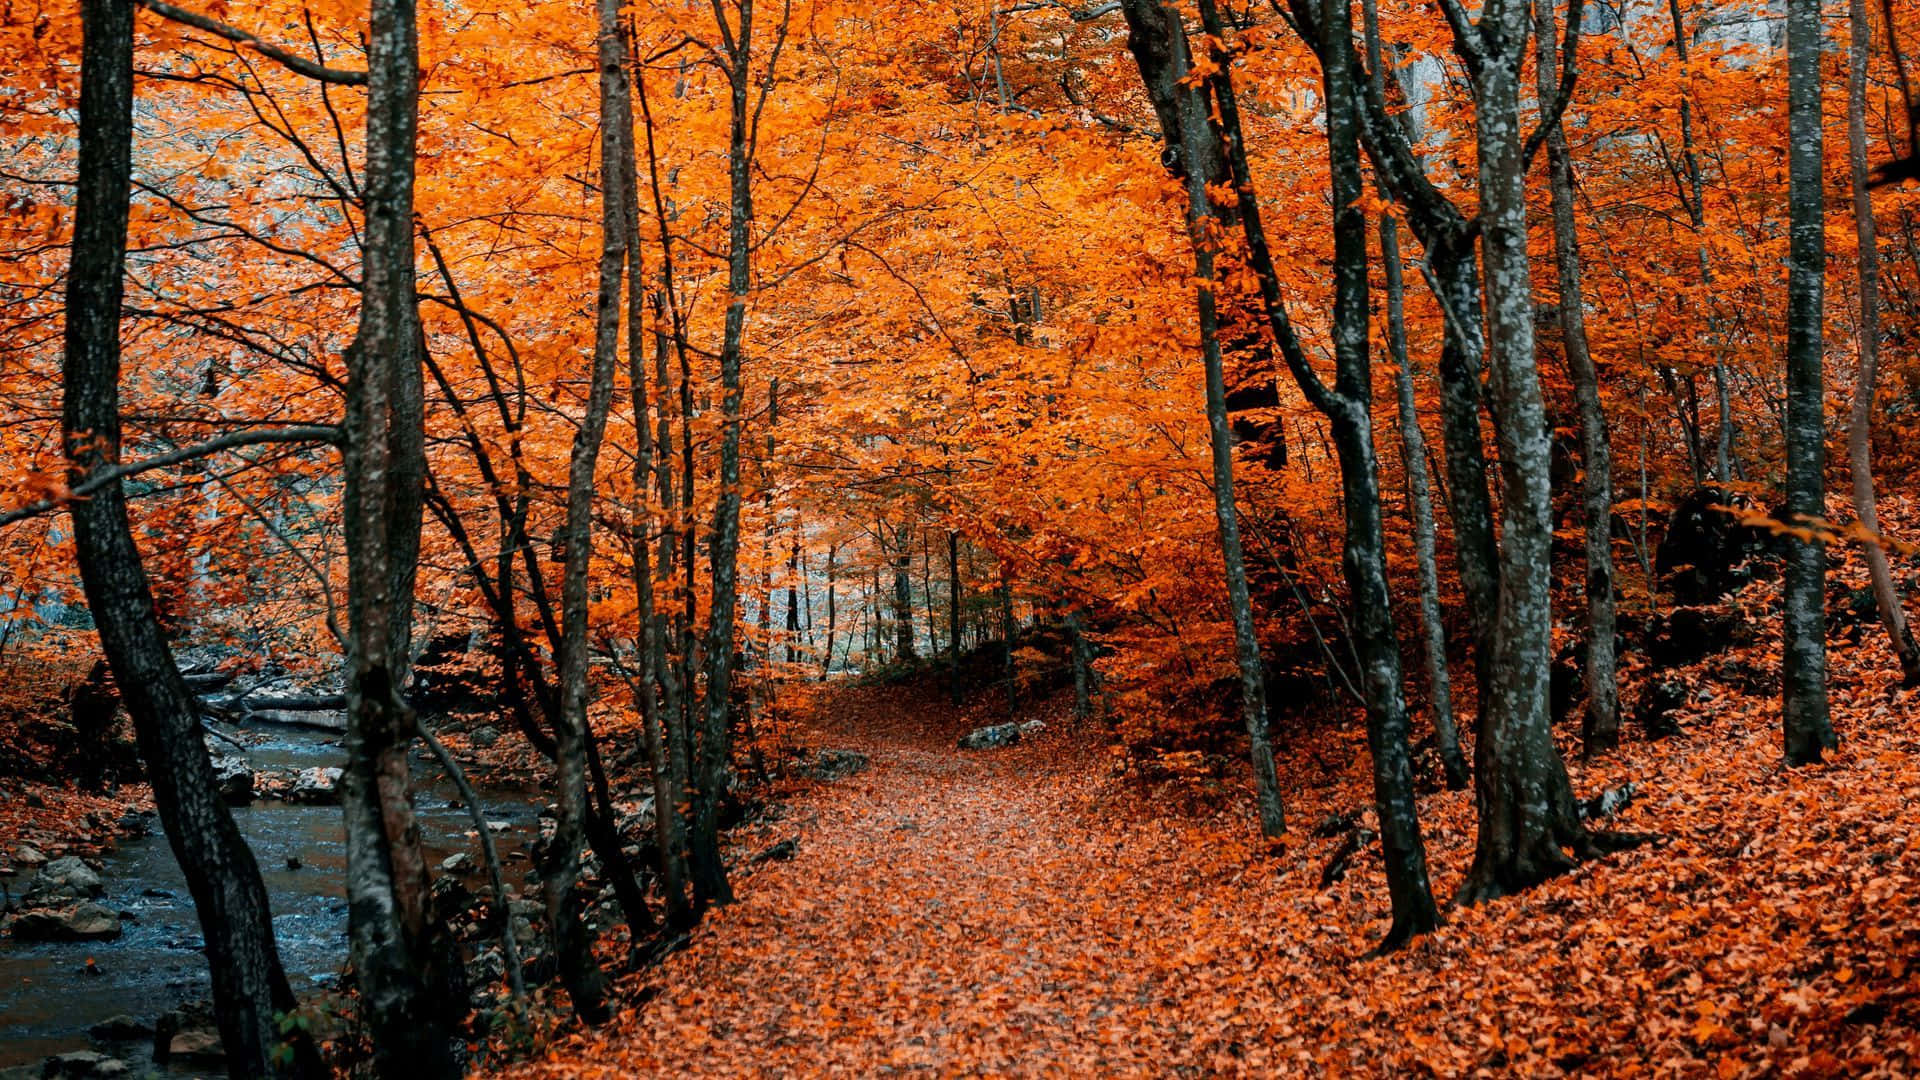 Vibrant Autumn Colors in the Forest Wallpaper